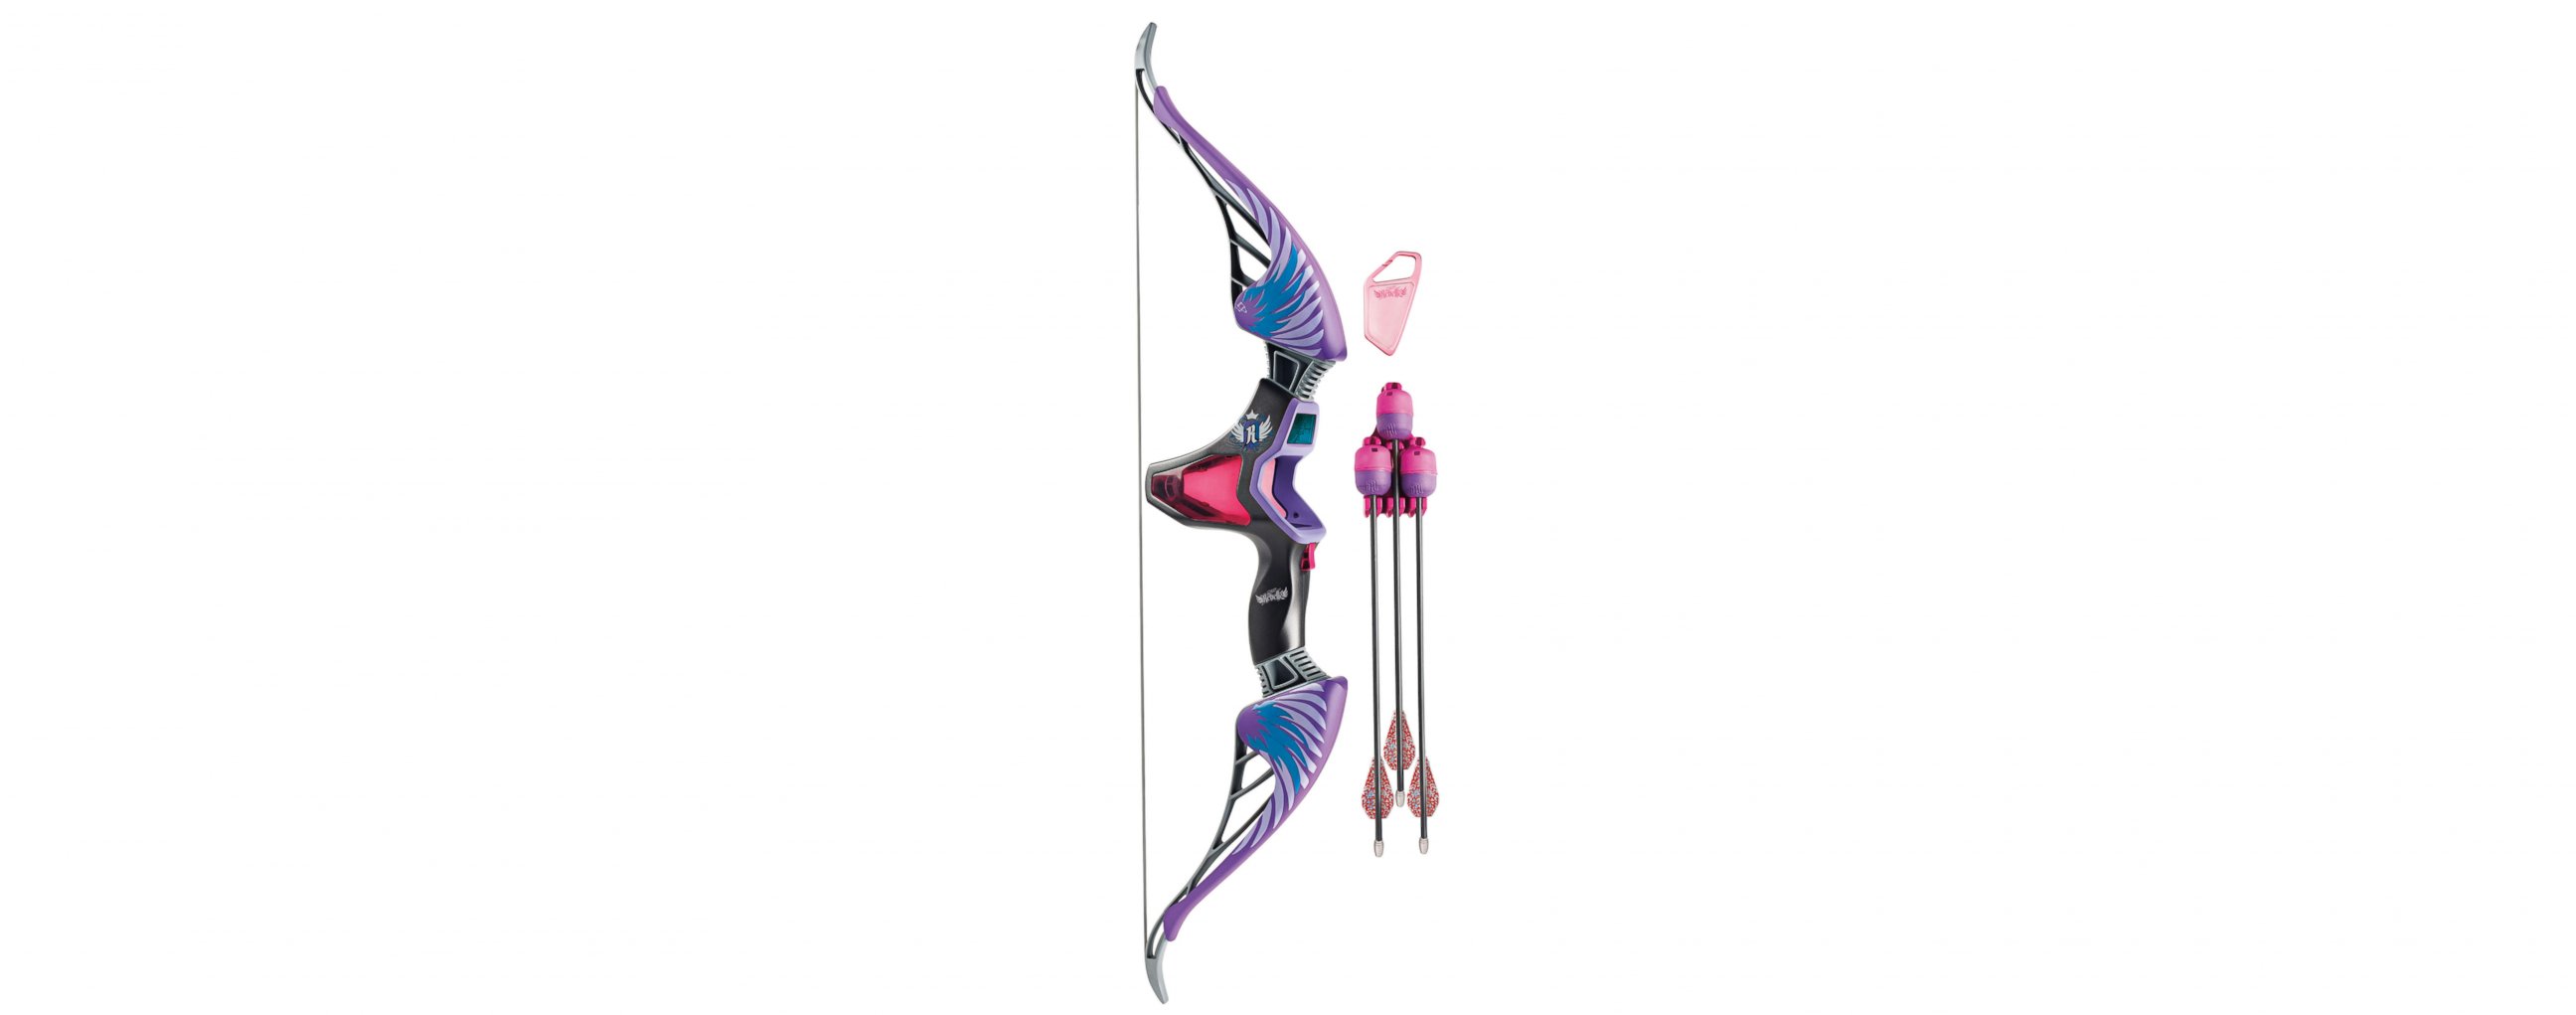 PHOTO: The Nerf Rebelle Agent Bow.